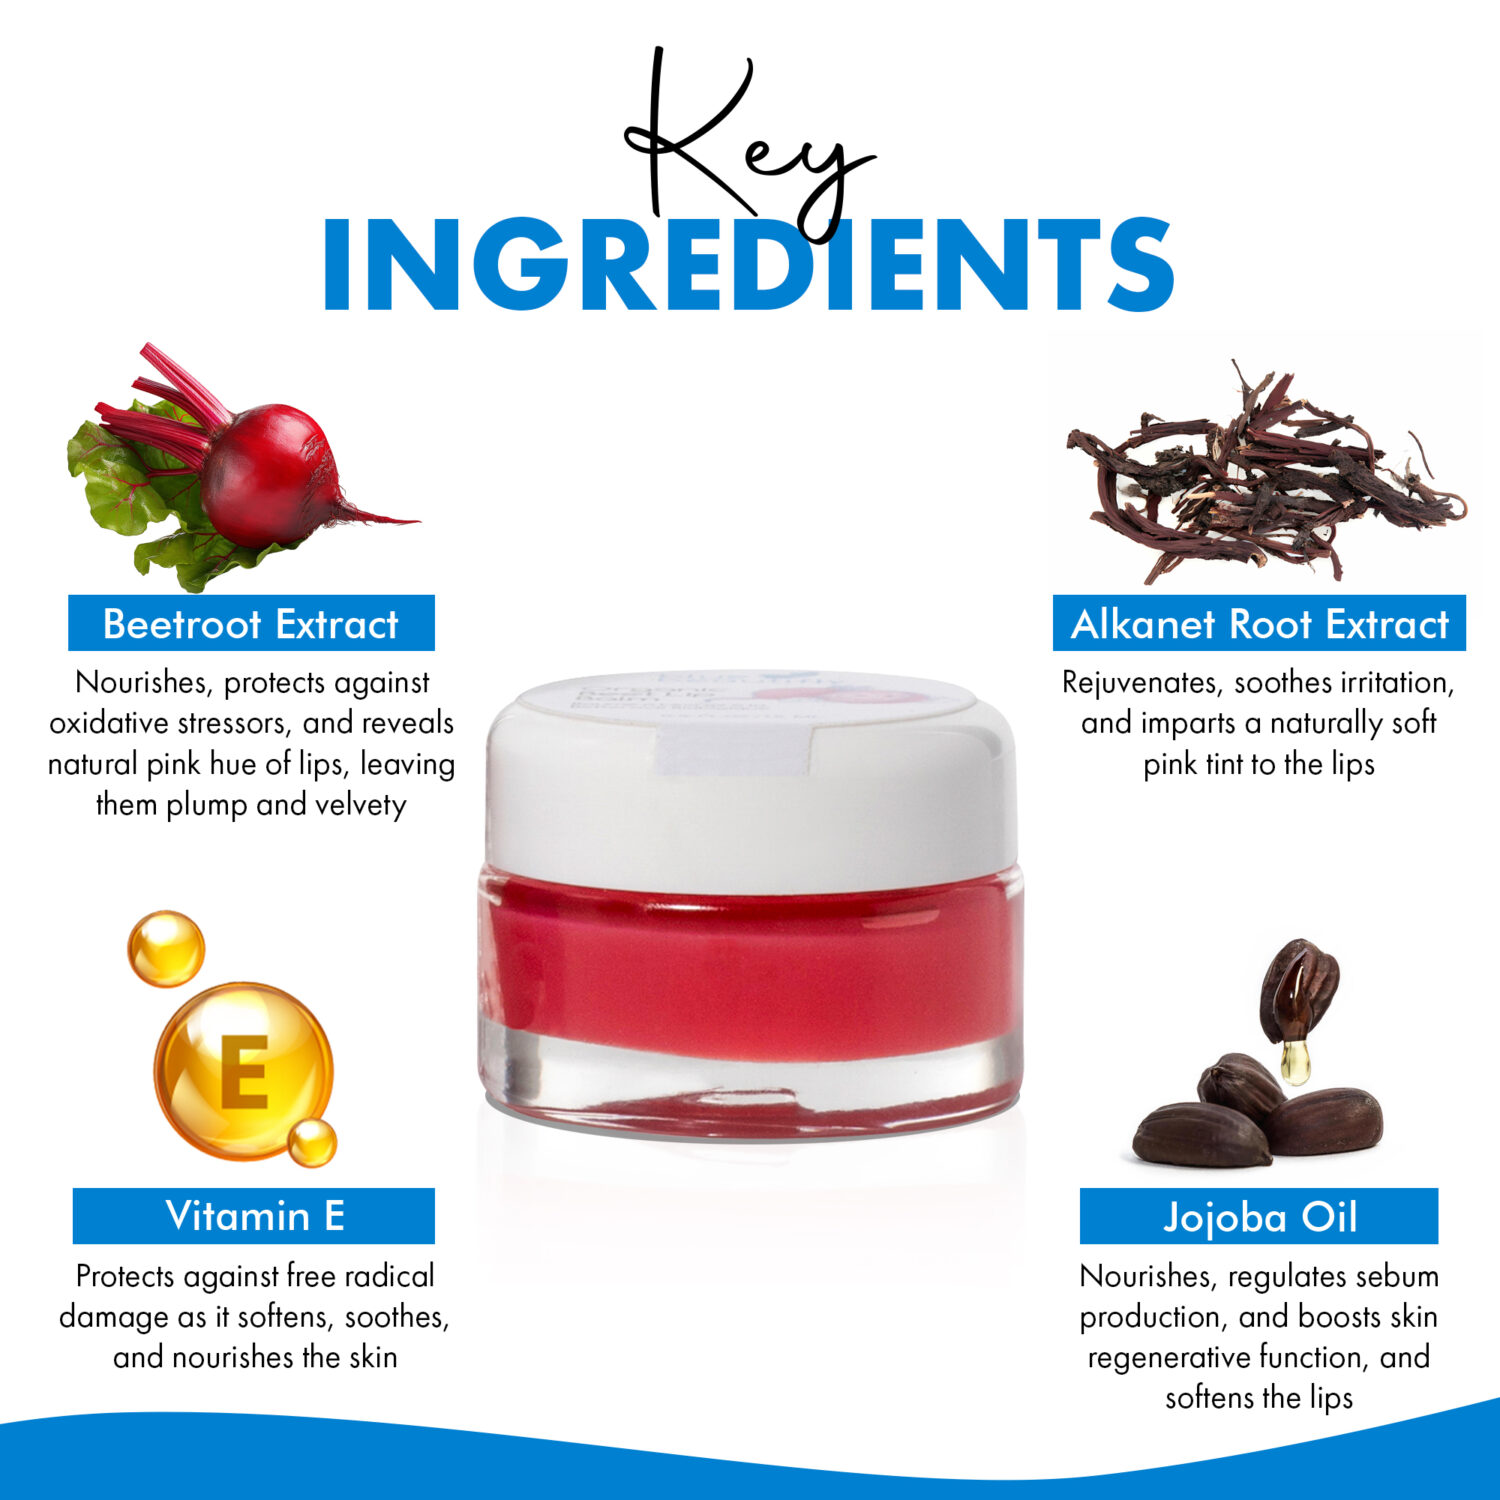 Blue Beautifly Organic Beet Lip Balm key ingredients are beetroot extract, alkanet root extract, jojoba oil, and vitamin E